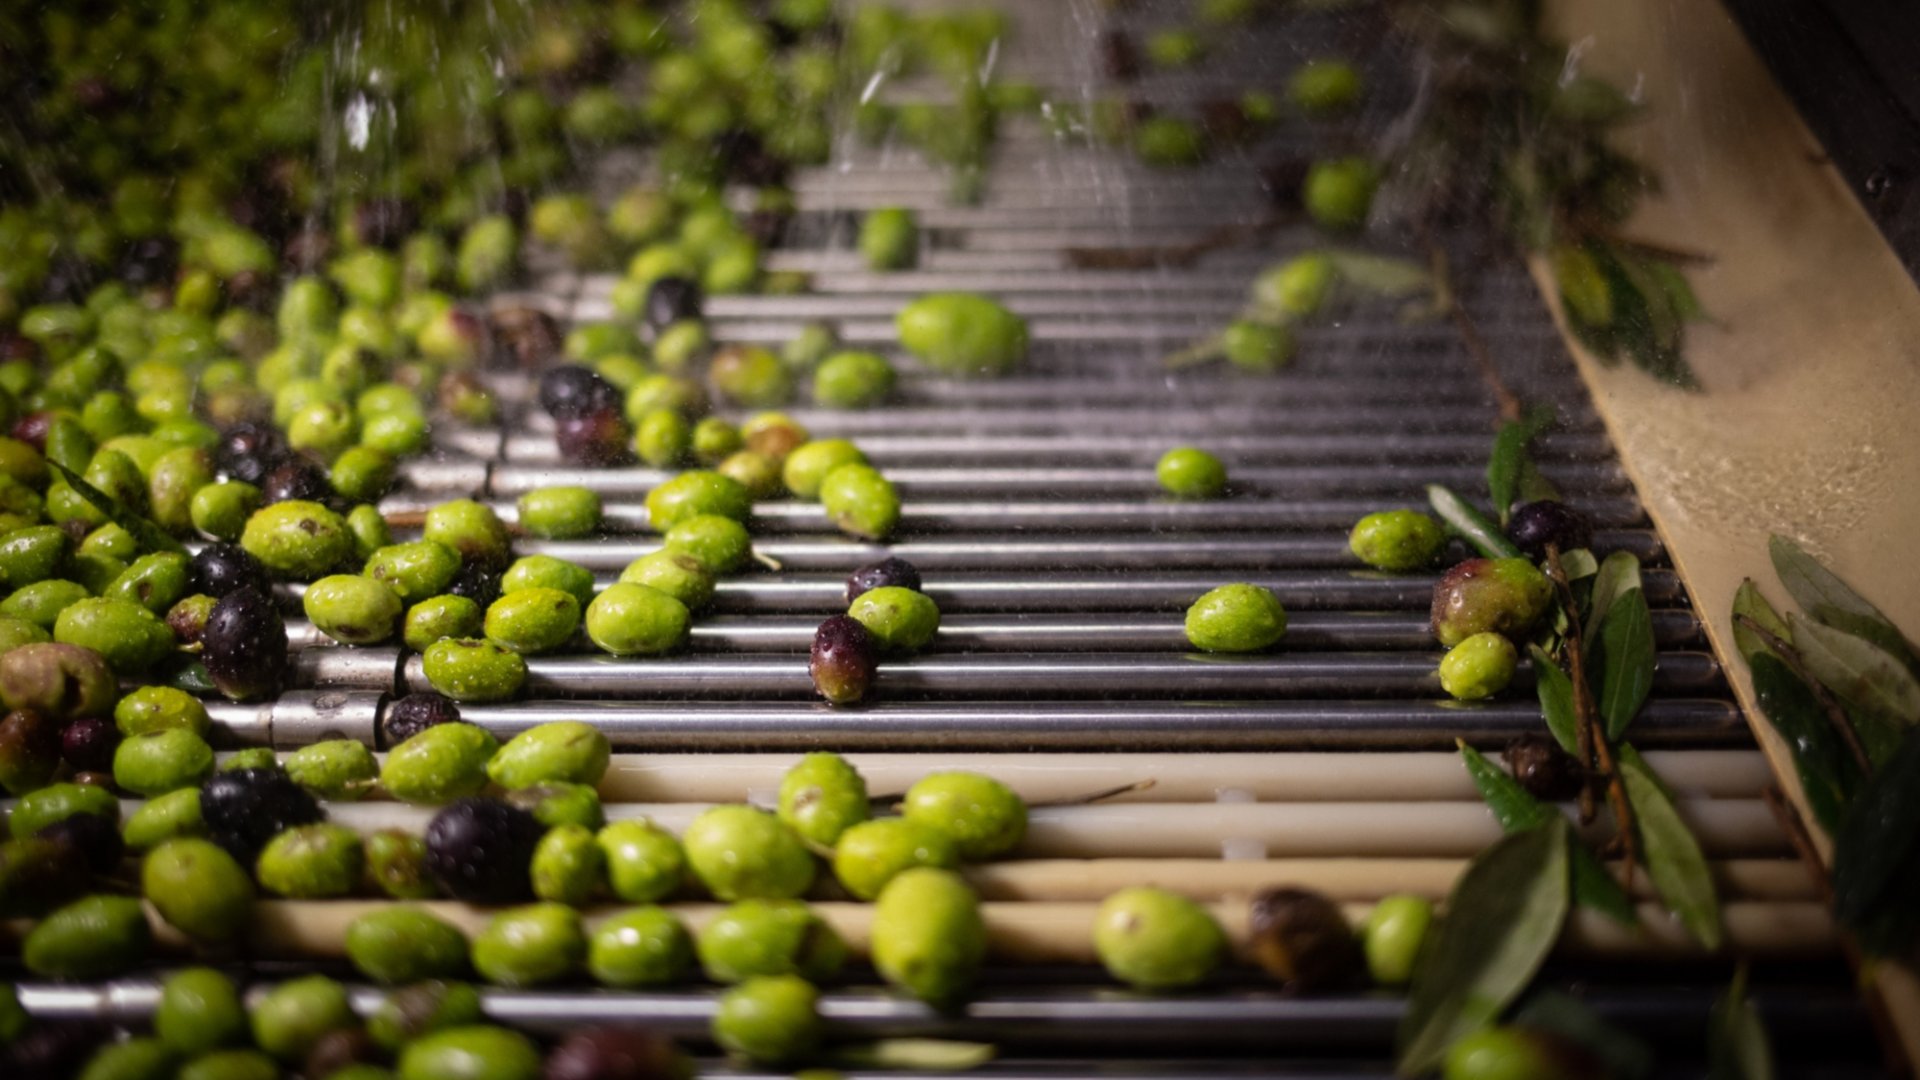 Tuscan olive oil mill tour with tasting ath Frantoio del Grevepesa